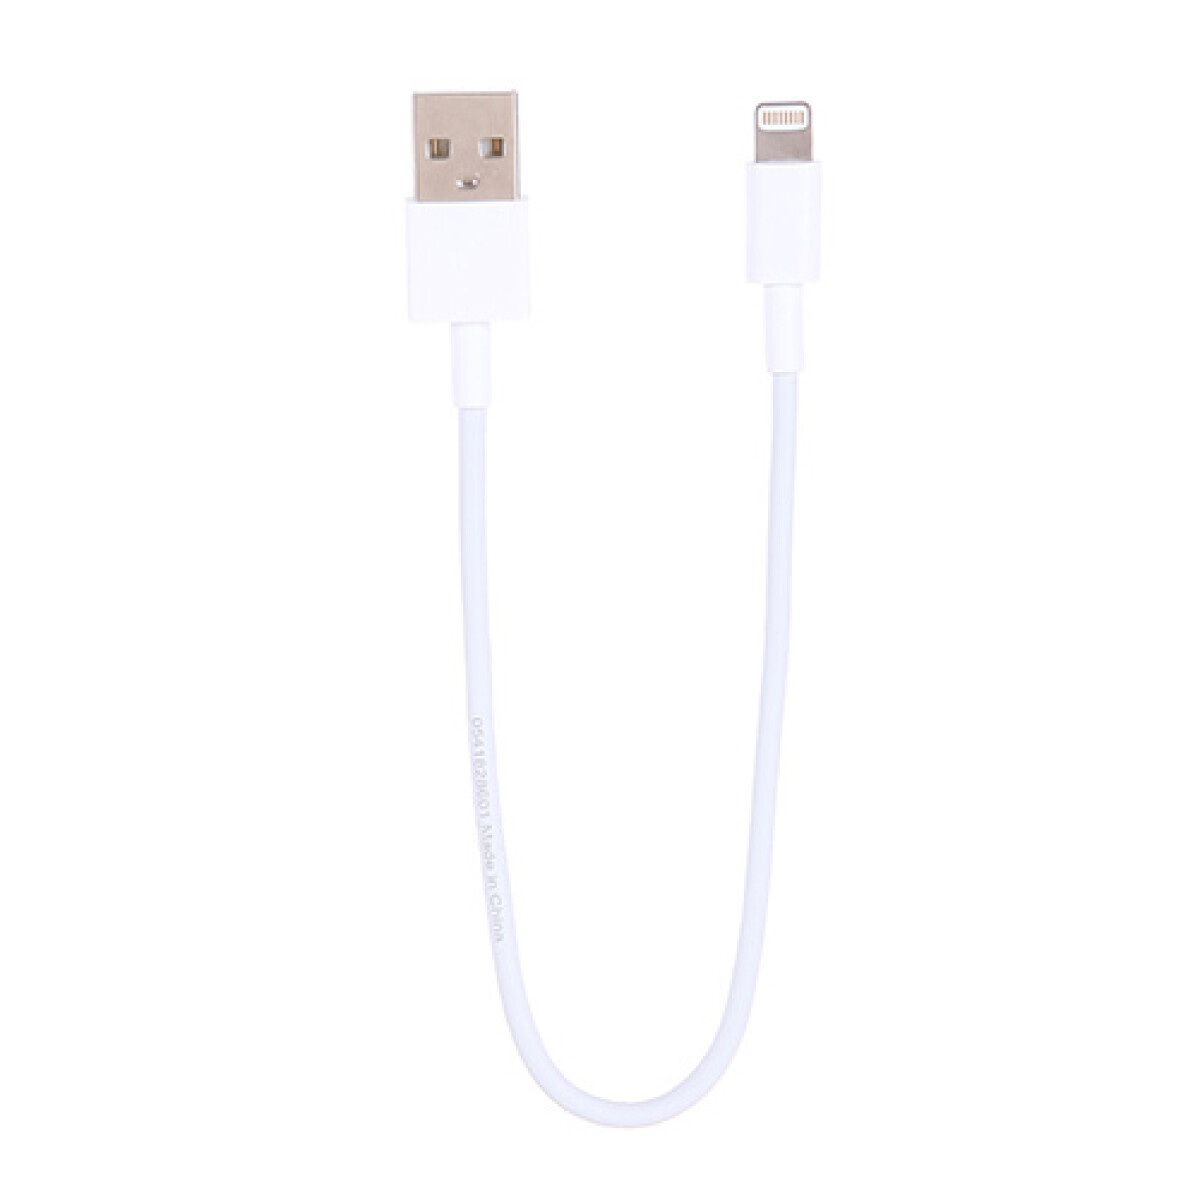 Cable USB conector Lightning corto 